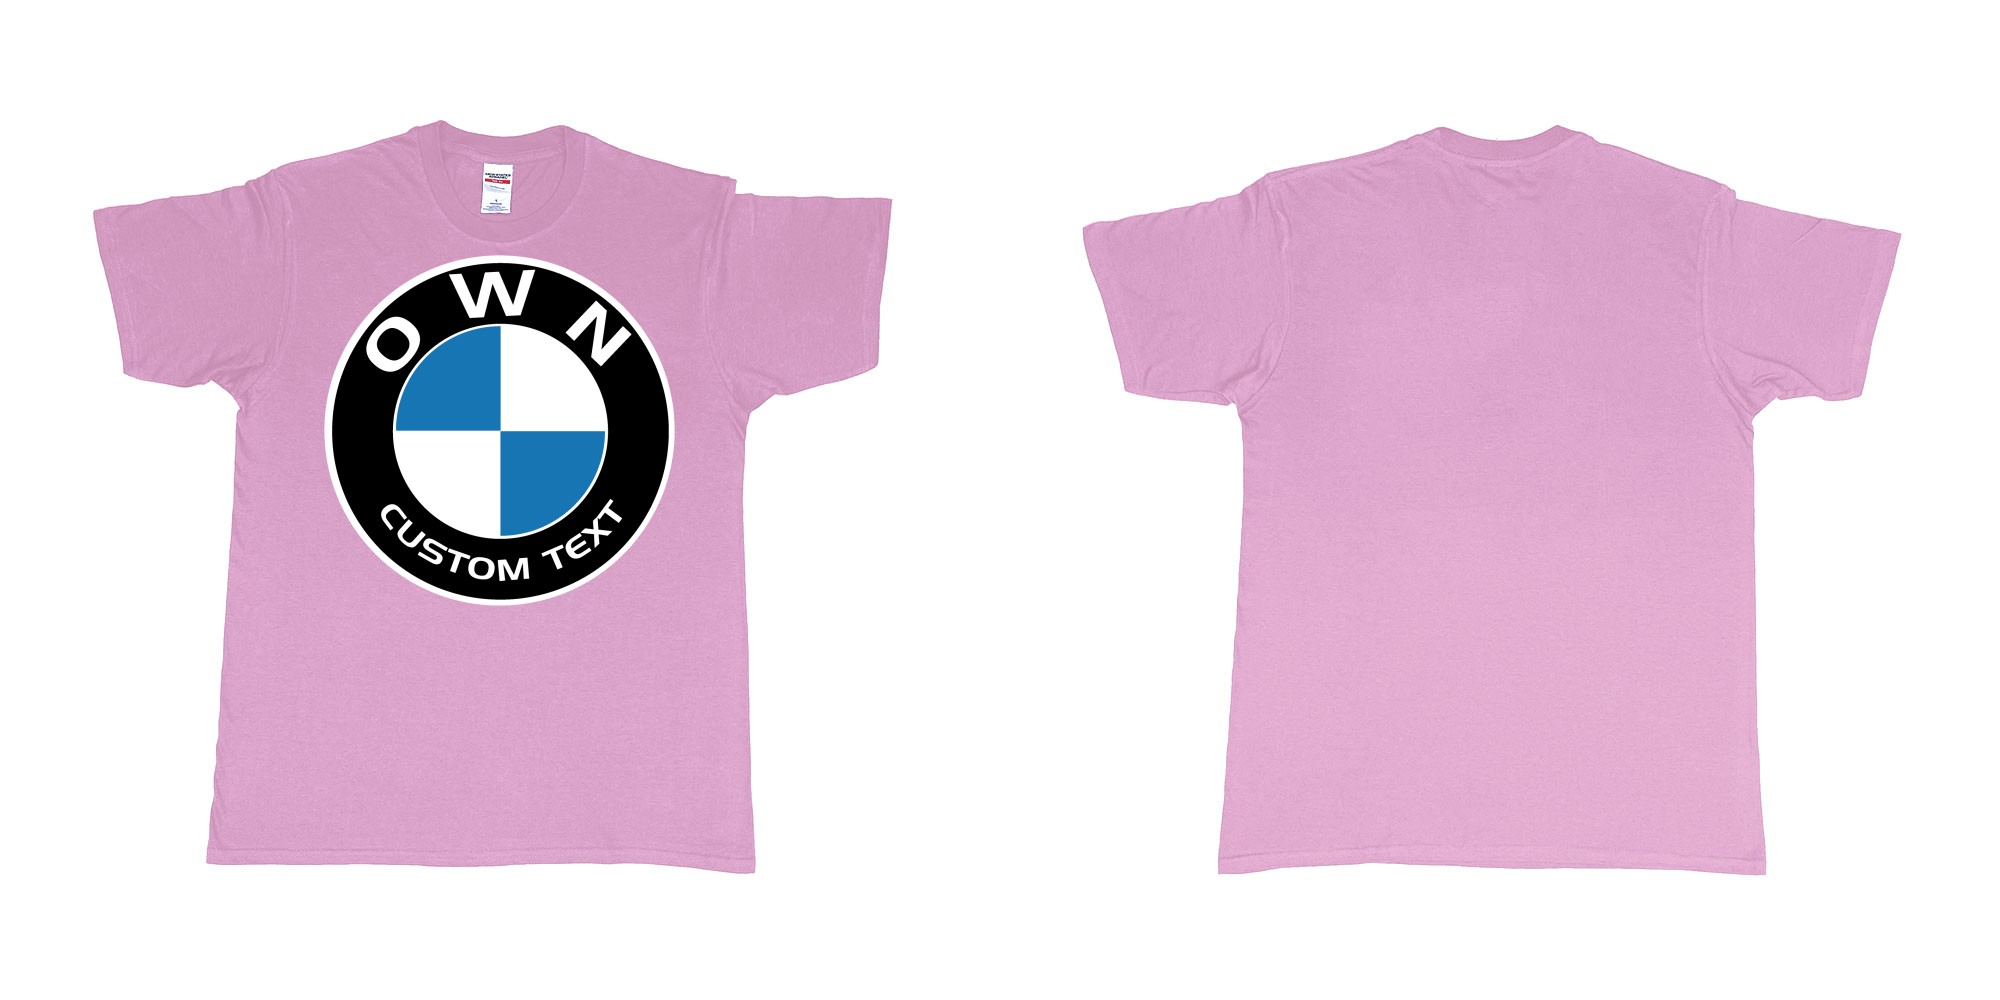 Custom tshirt design BMW logo custom text tshirt printing in fabric color light-pink choice your own text made in Bali by The Pirate Way